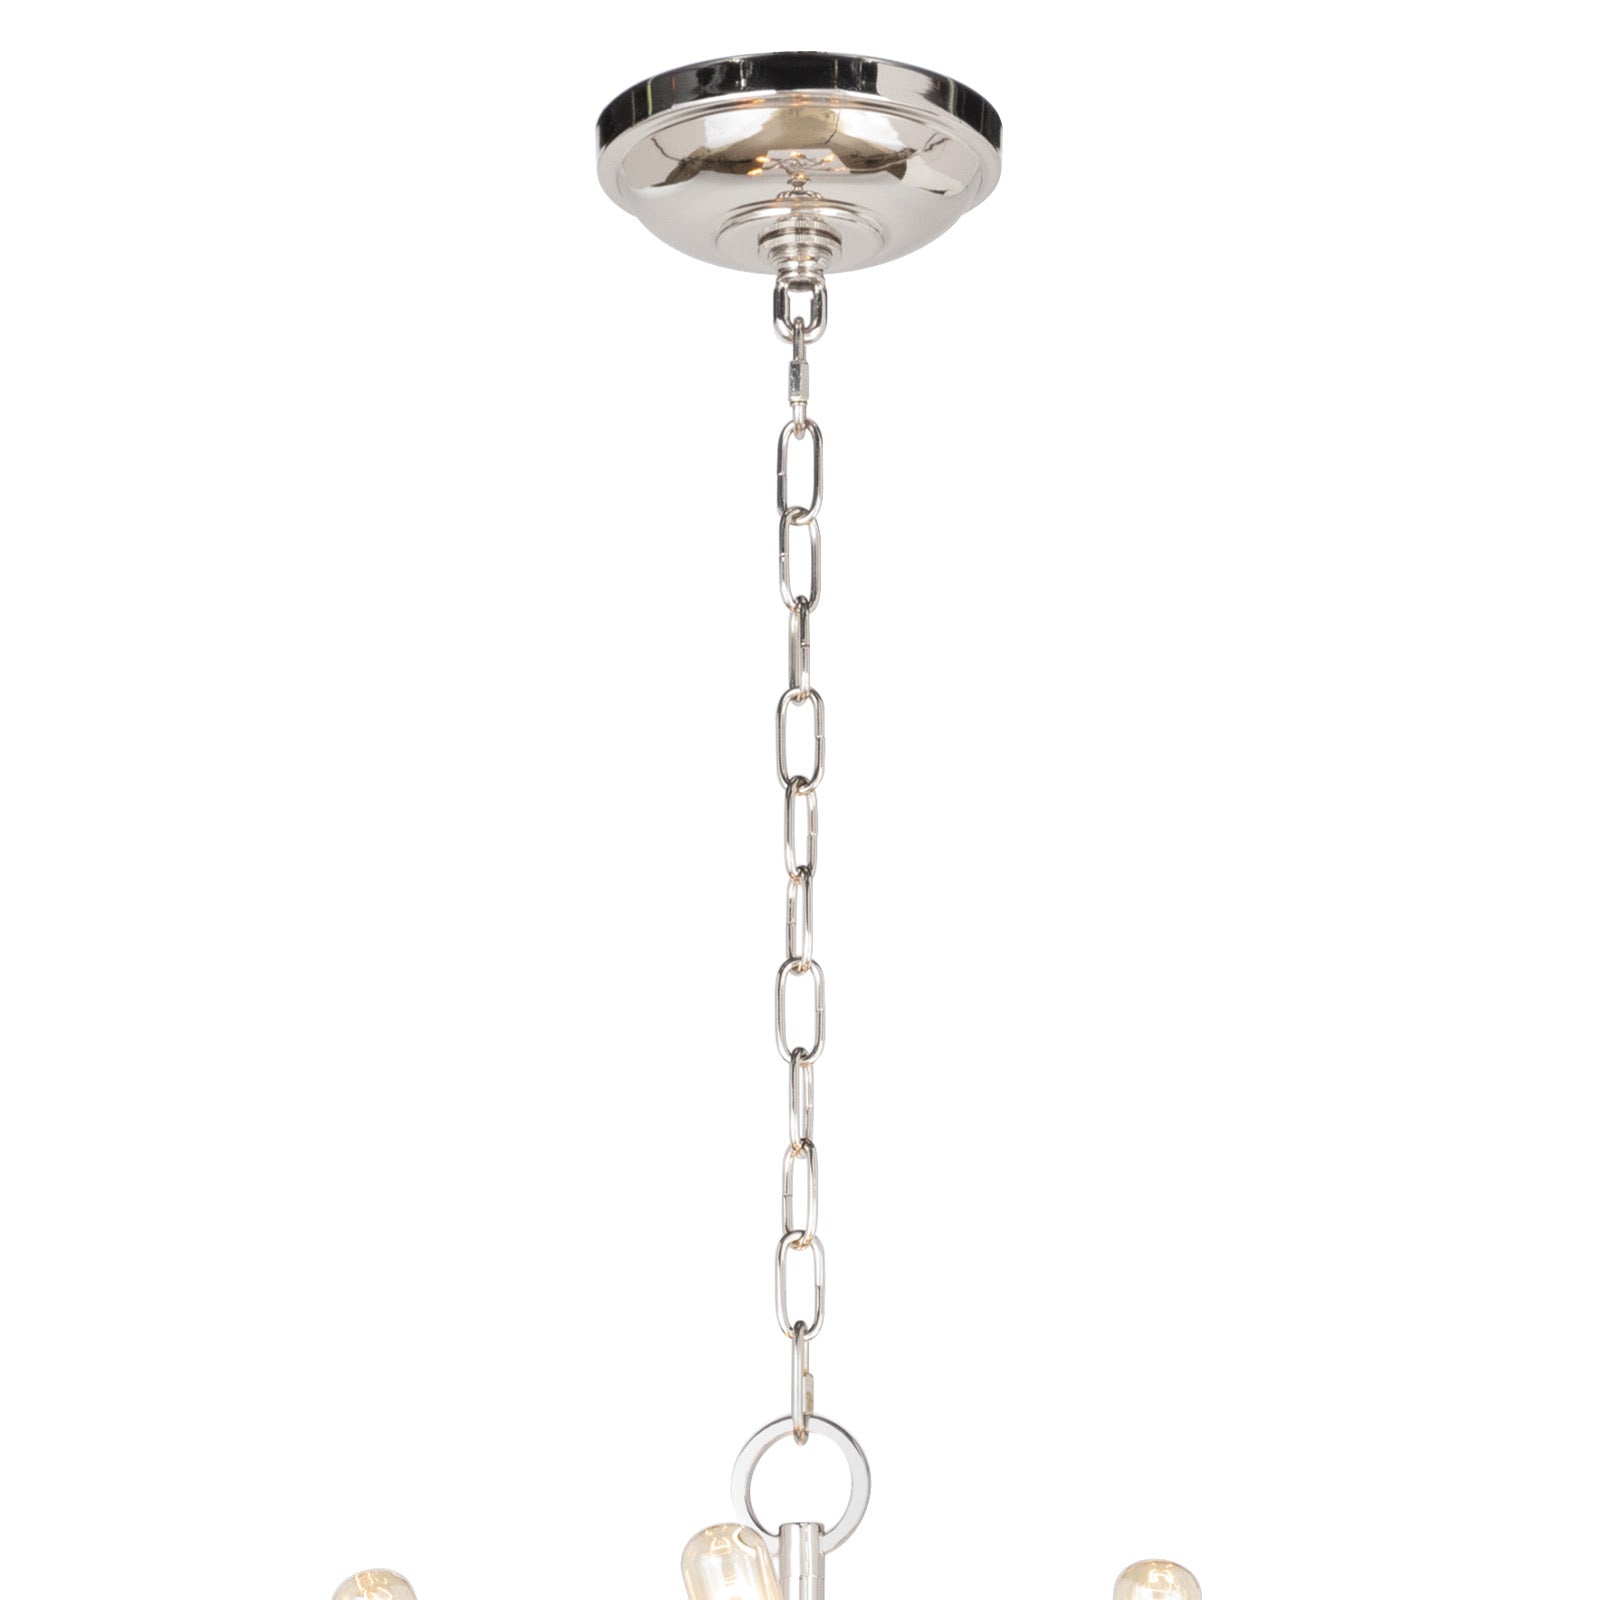 Cobra Chandelier Small in Polished Nickel by Regina Andrew